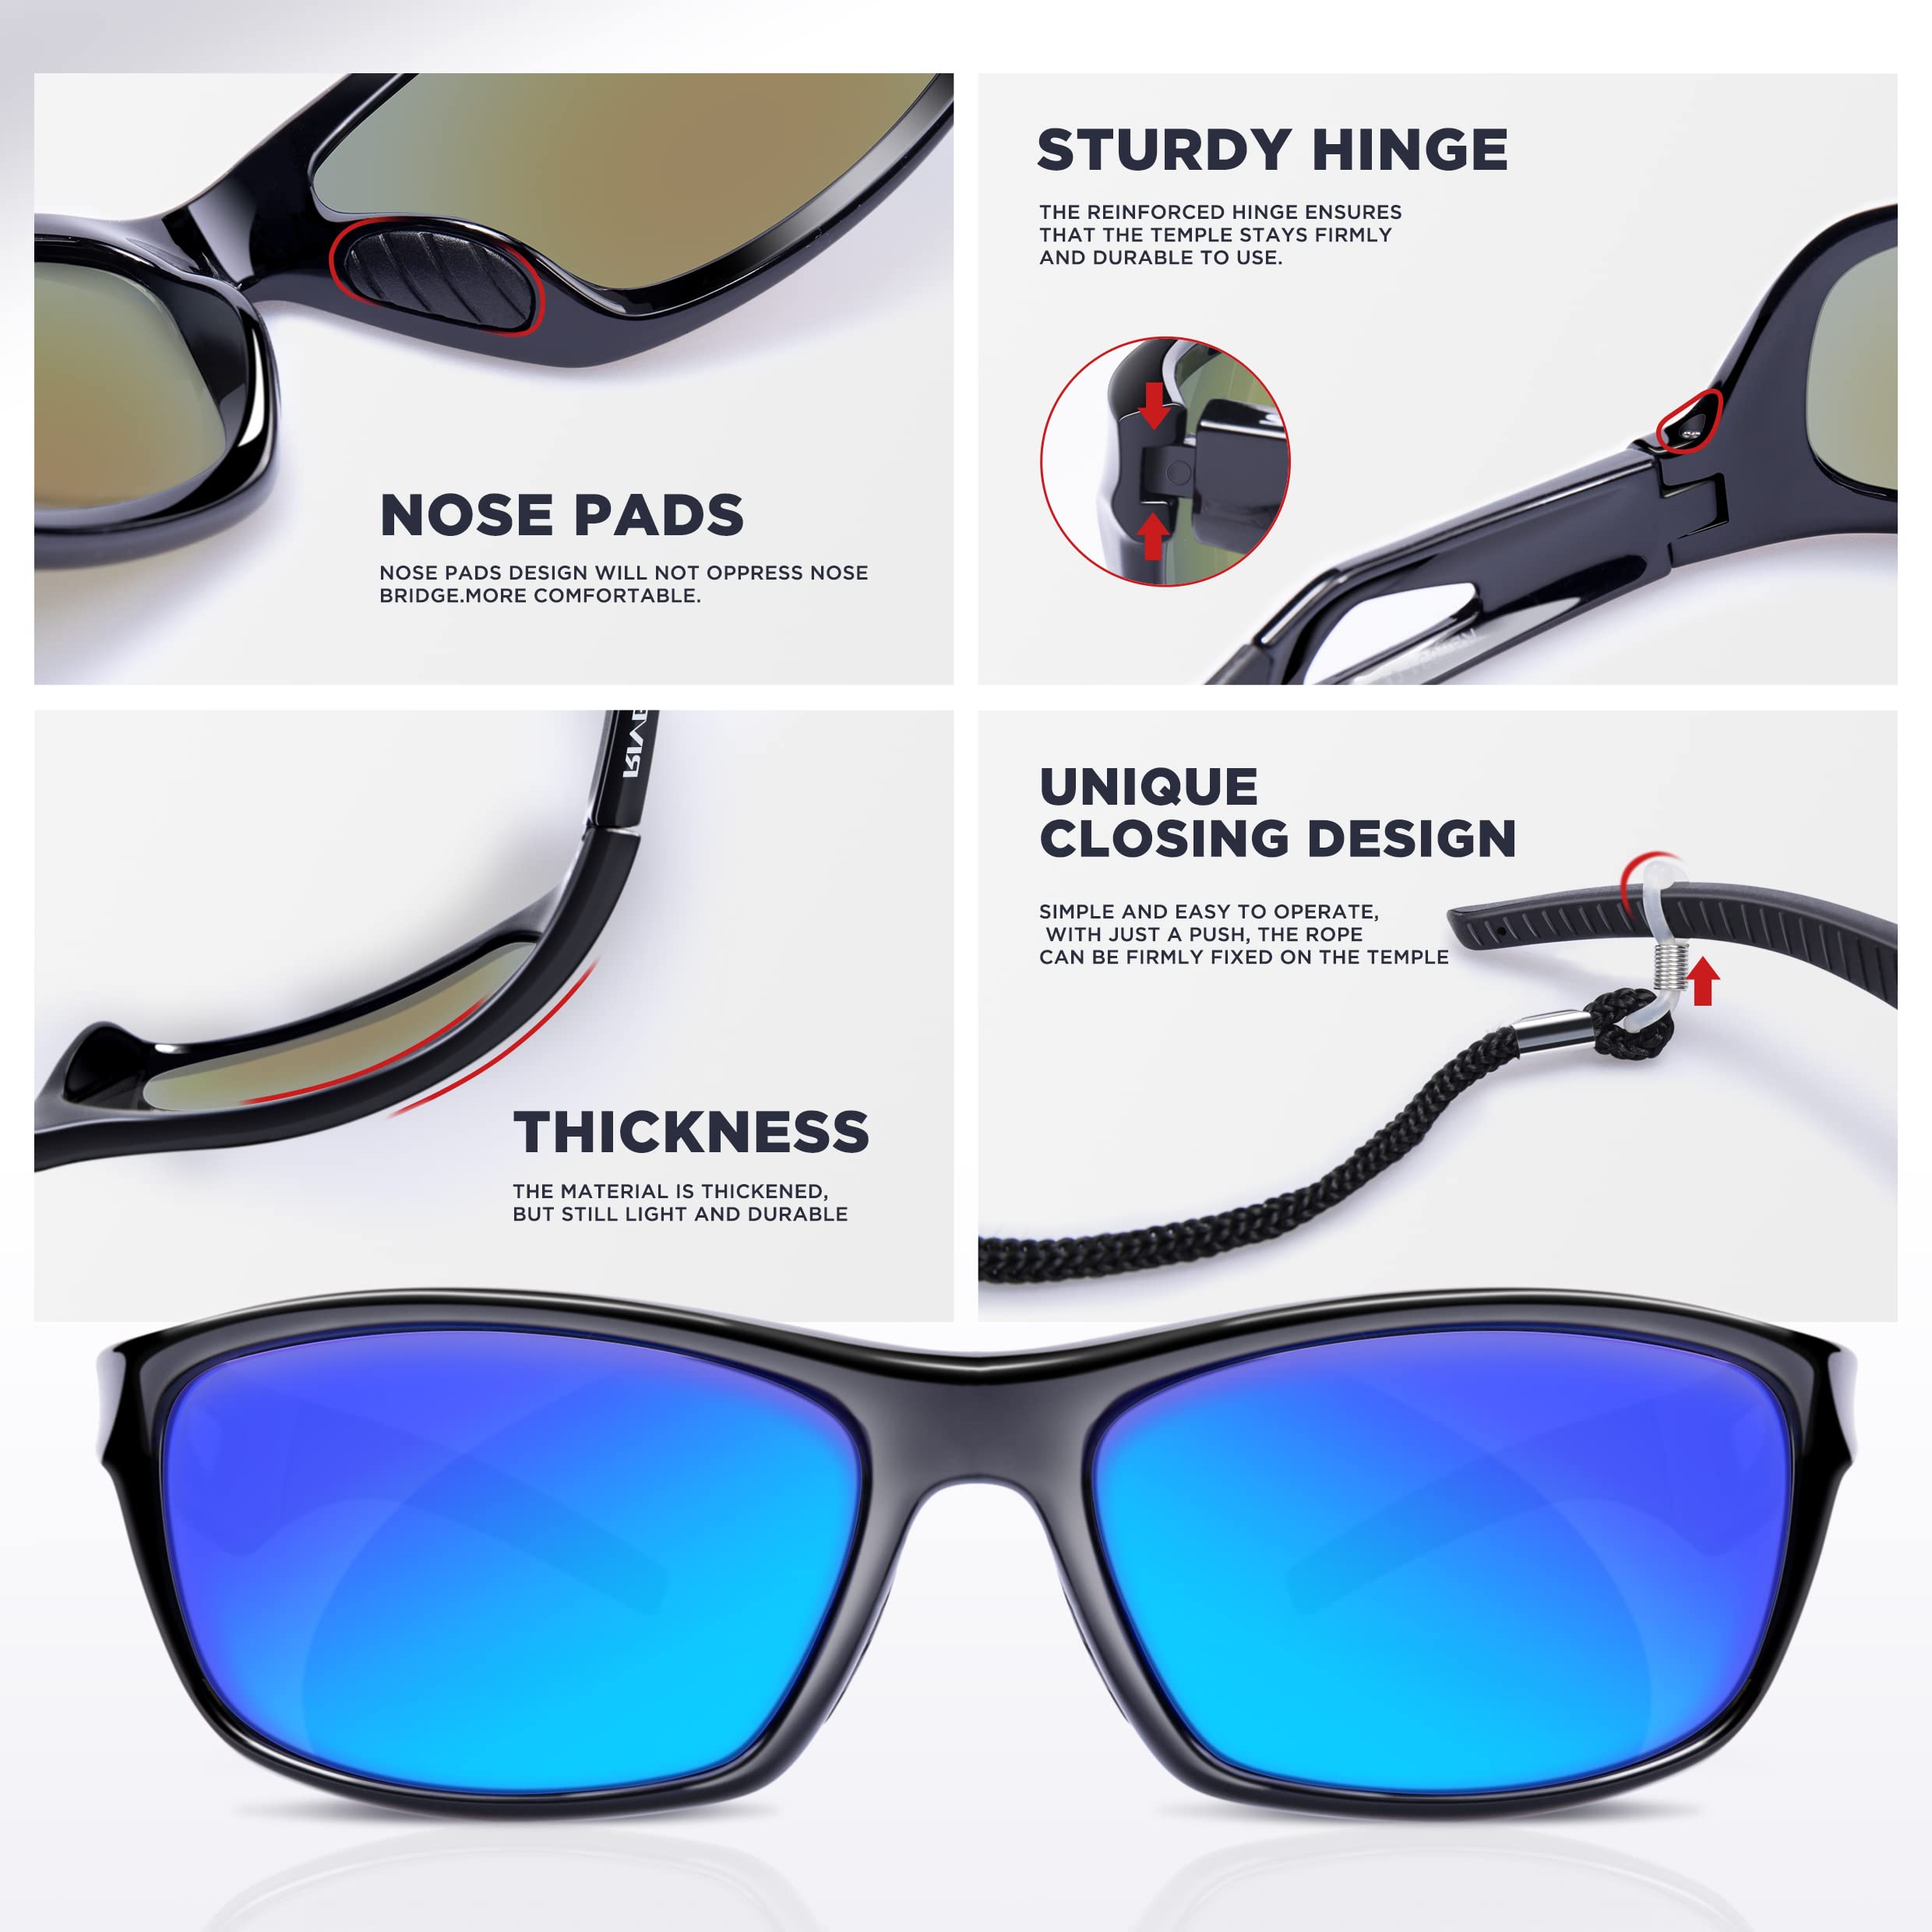 RIVBOS Polarized Sports Sunglasses Driving shades For Men TR90 Unbreakable Frame RB831